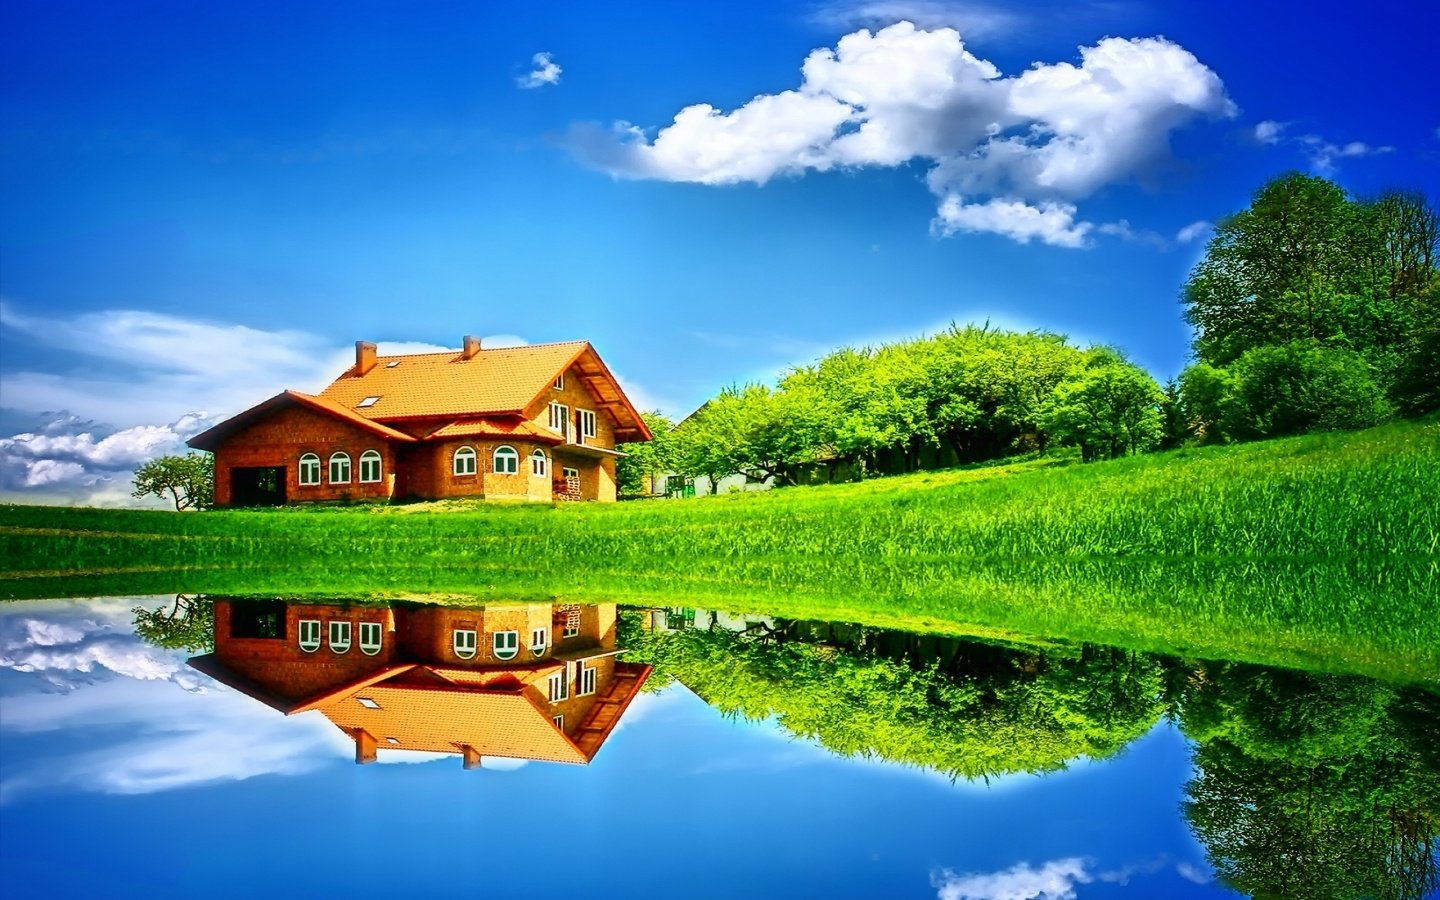 My Dream House Wallpaper The Art Mad Wallpapers 1440x900